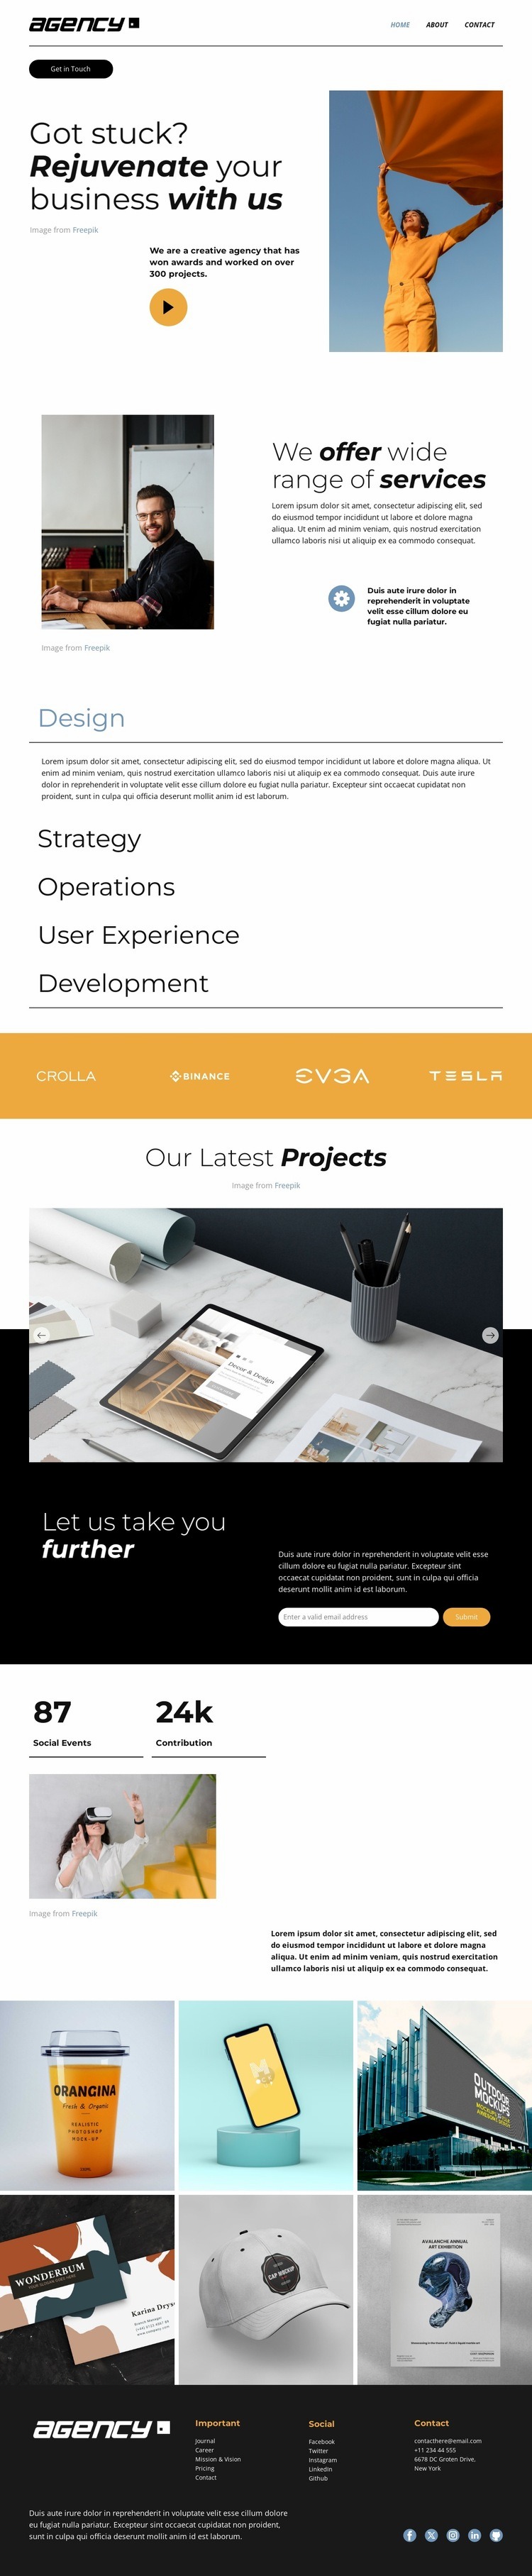 Scale to greater success Webflow Template Alternative